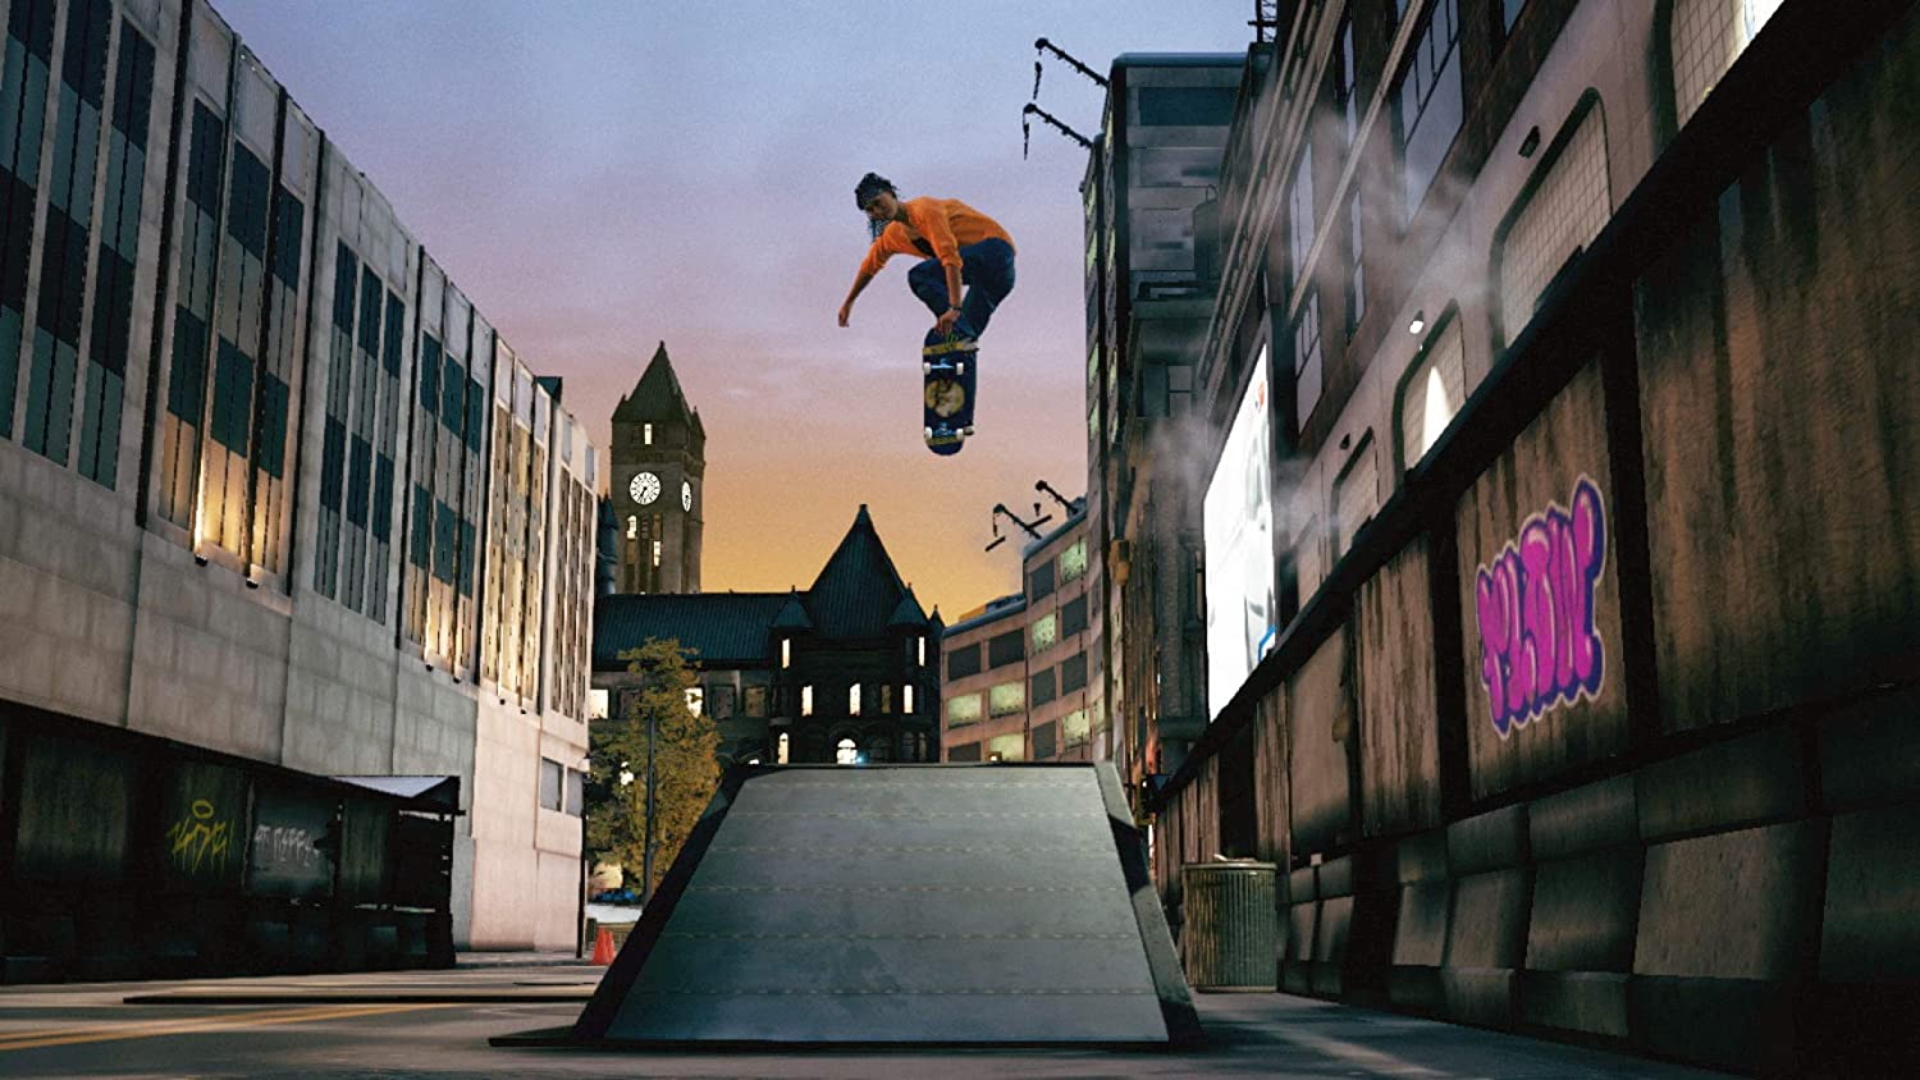 A skateboarder performing a nosegrab in mid air